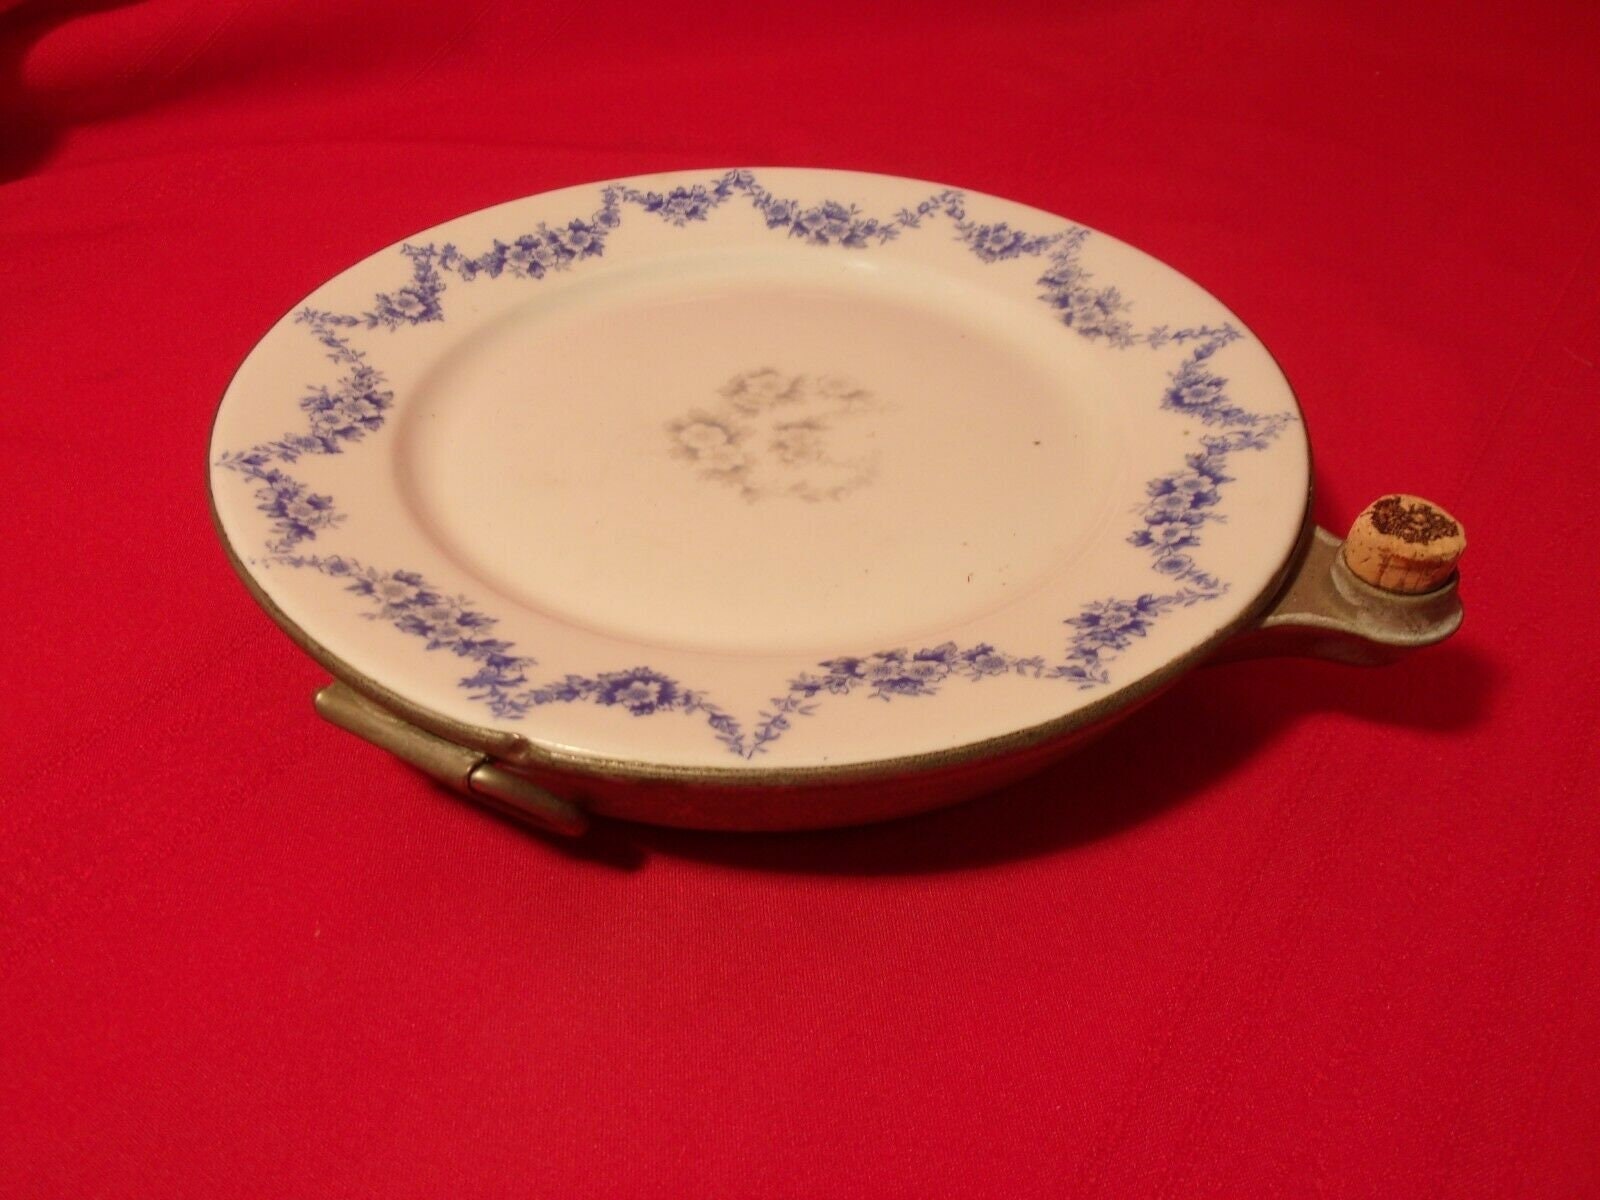 Antique German Hot Water Warming Dish. Porcelain Bowl, Metal Base and Spout  to Hold Hot Water, Metal Handles. 